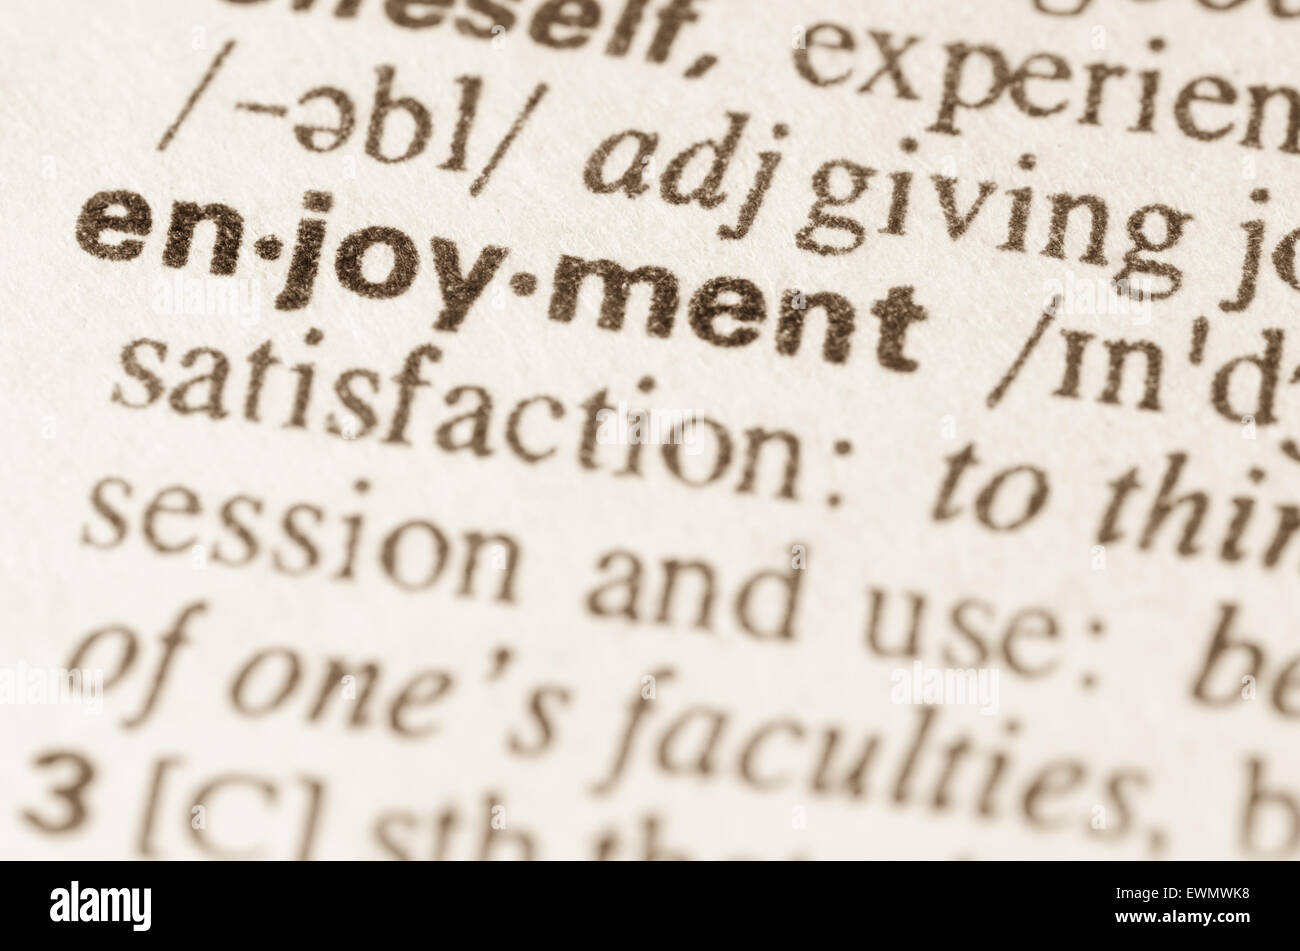 Definition of word enjoyment in dictionary Stock Photo